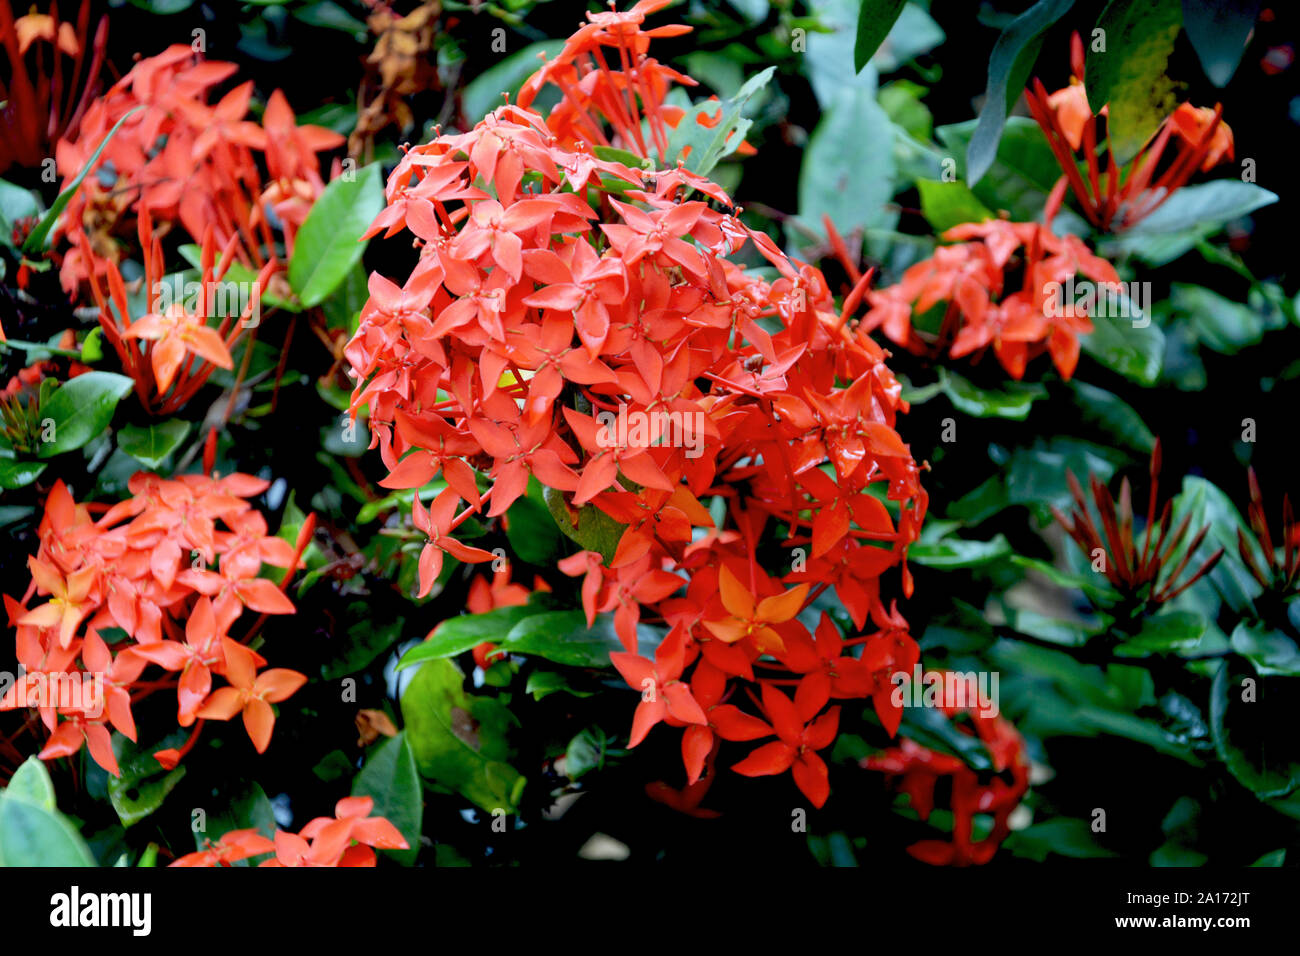 Orange Epidendrum Garden Orchid flowers growing in Mawlynnong village of Shillong with green leaves Stock Photo